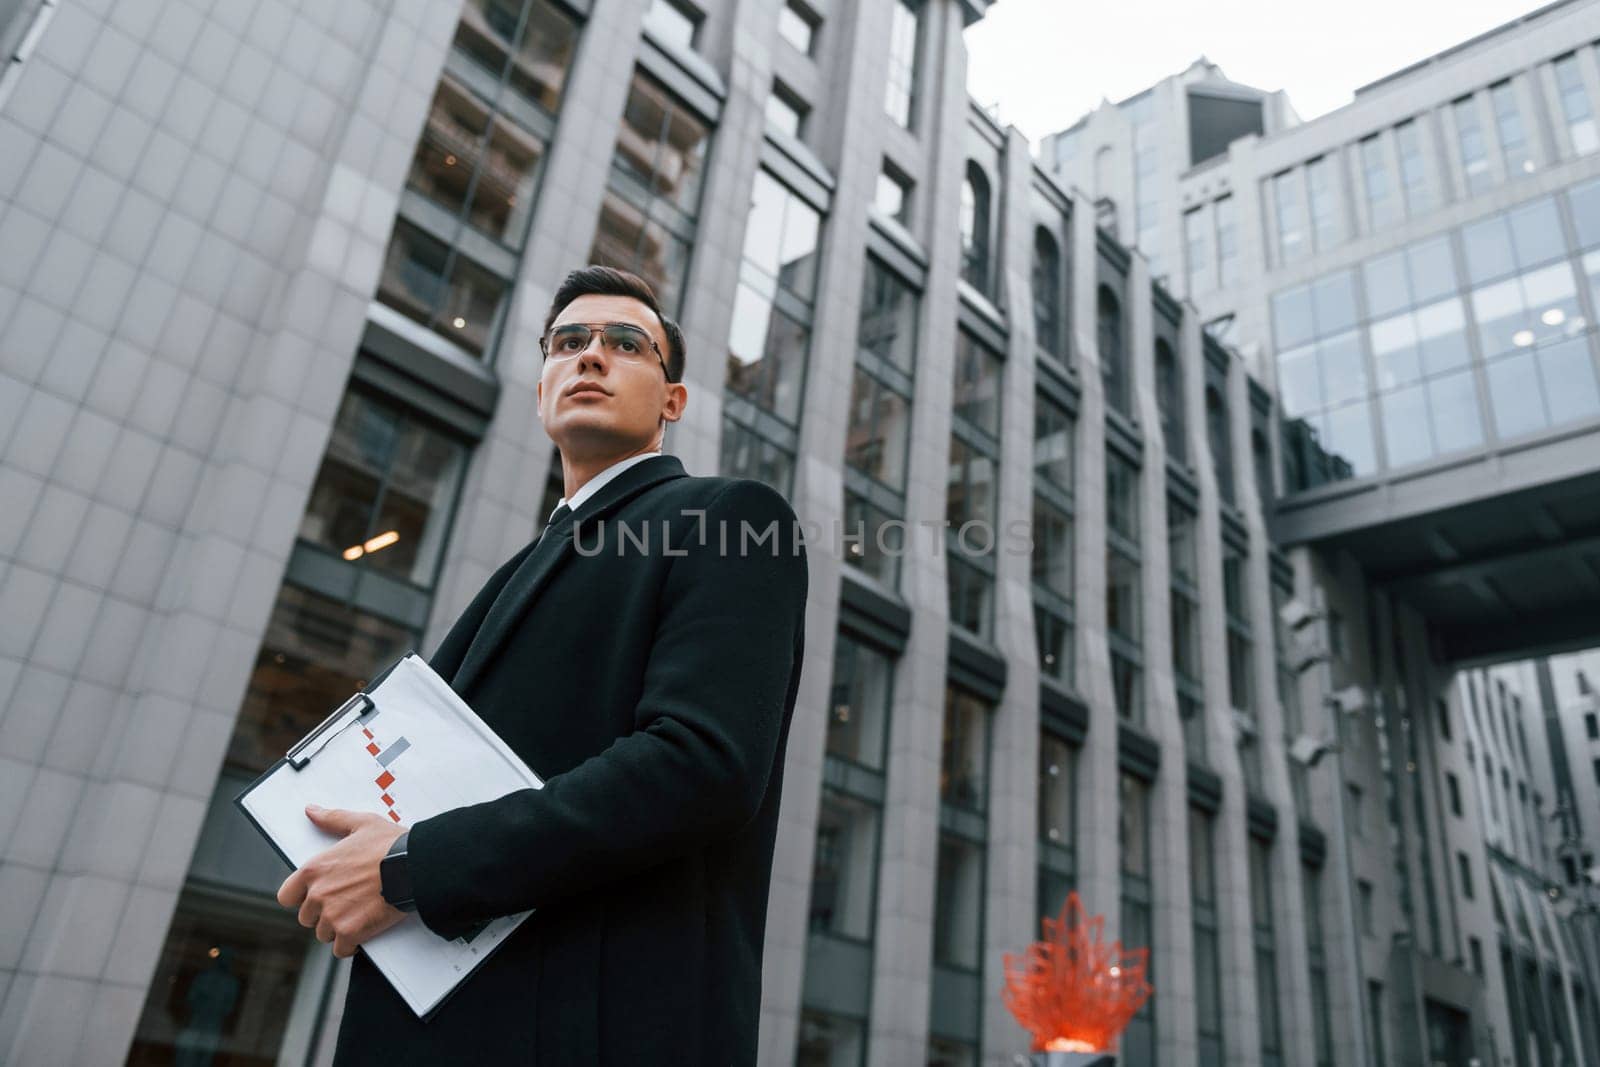 Grey building behind. Businessman in black suit and tie is outdoors in the city.